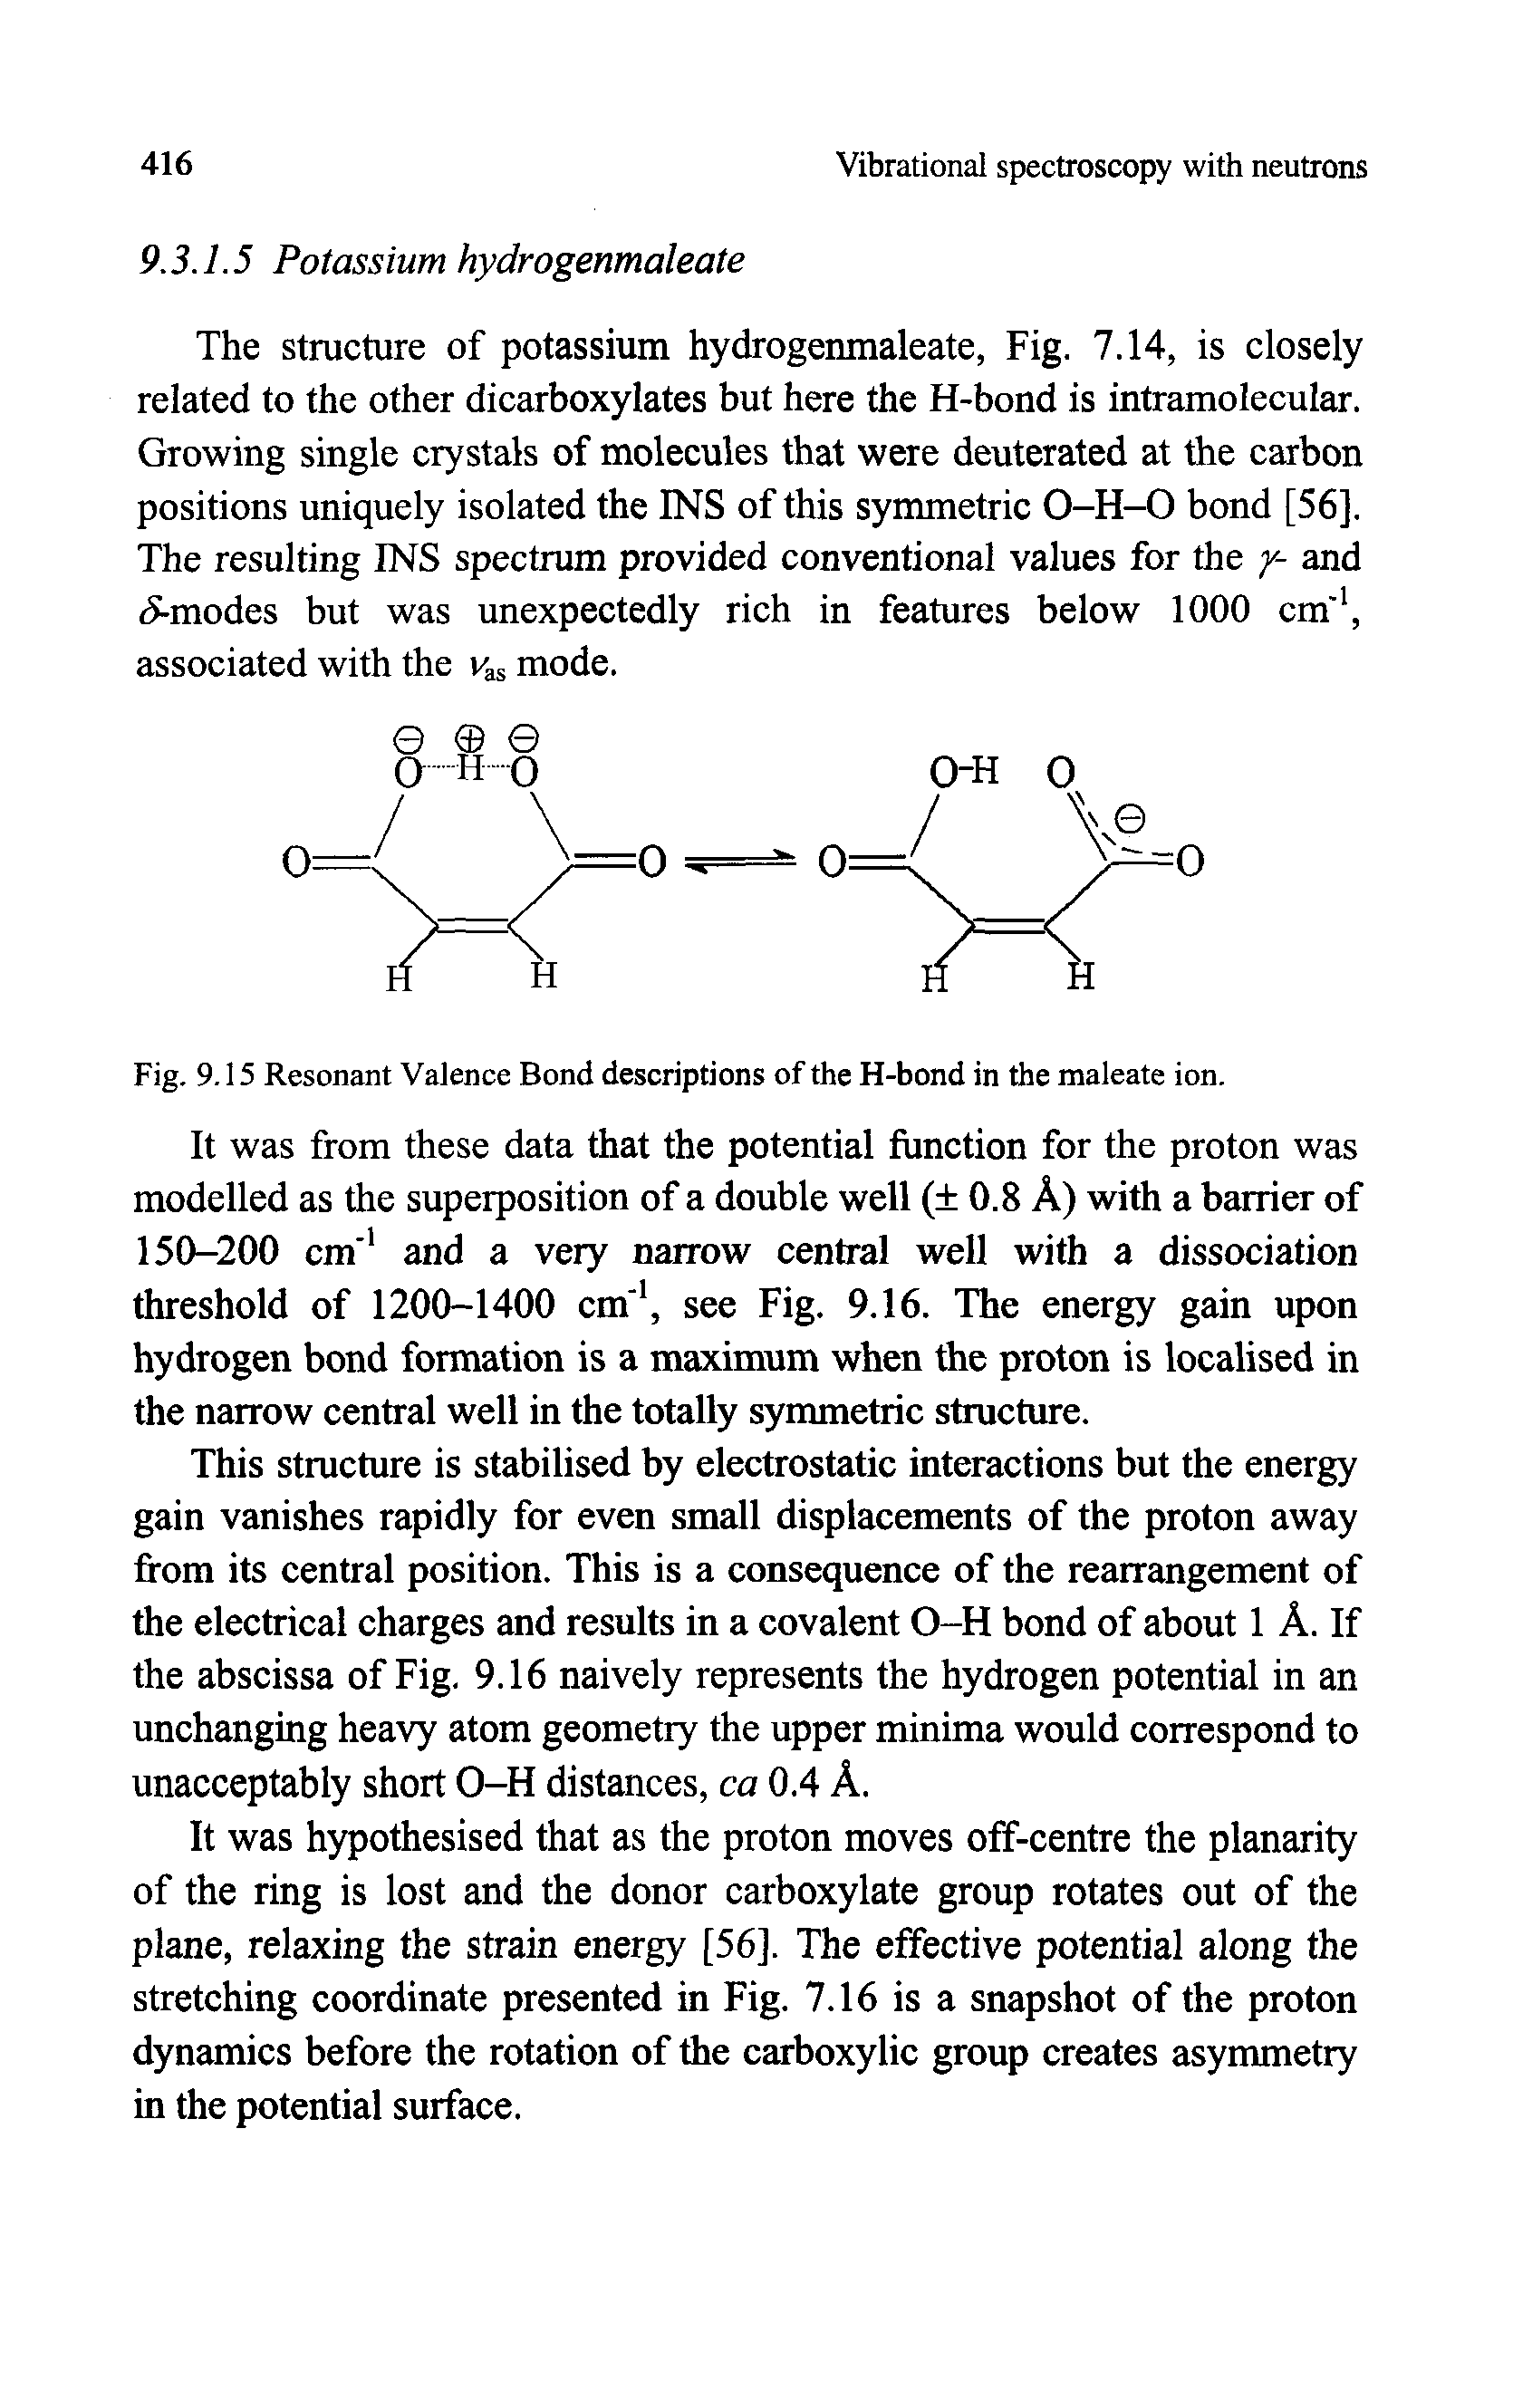 Fig. 9.15 Resonant Valence Bond descriptions of the H-bond in the maleate ion.